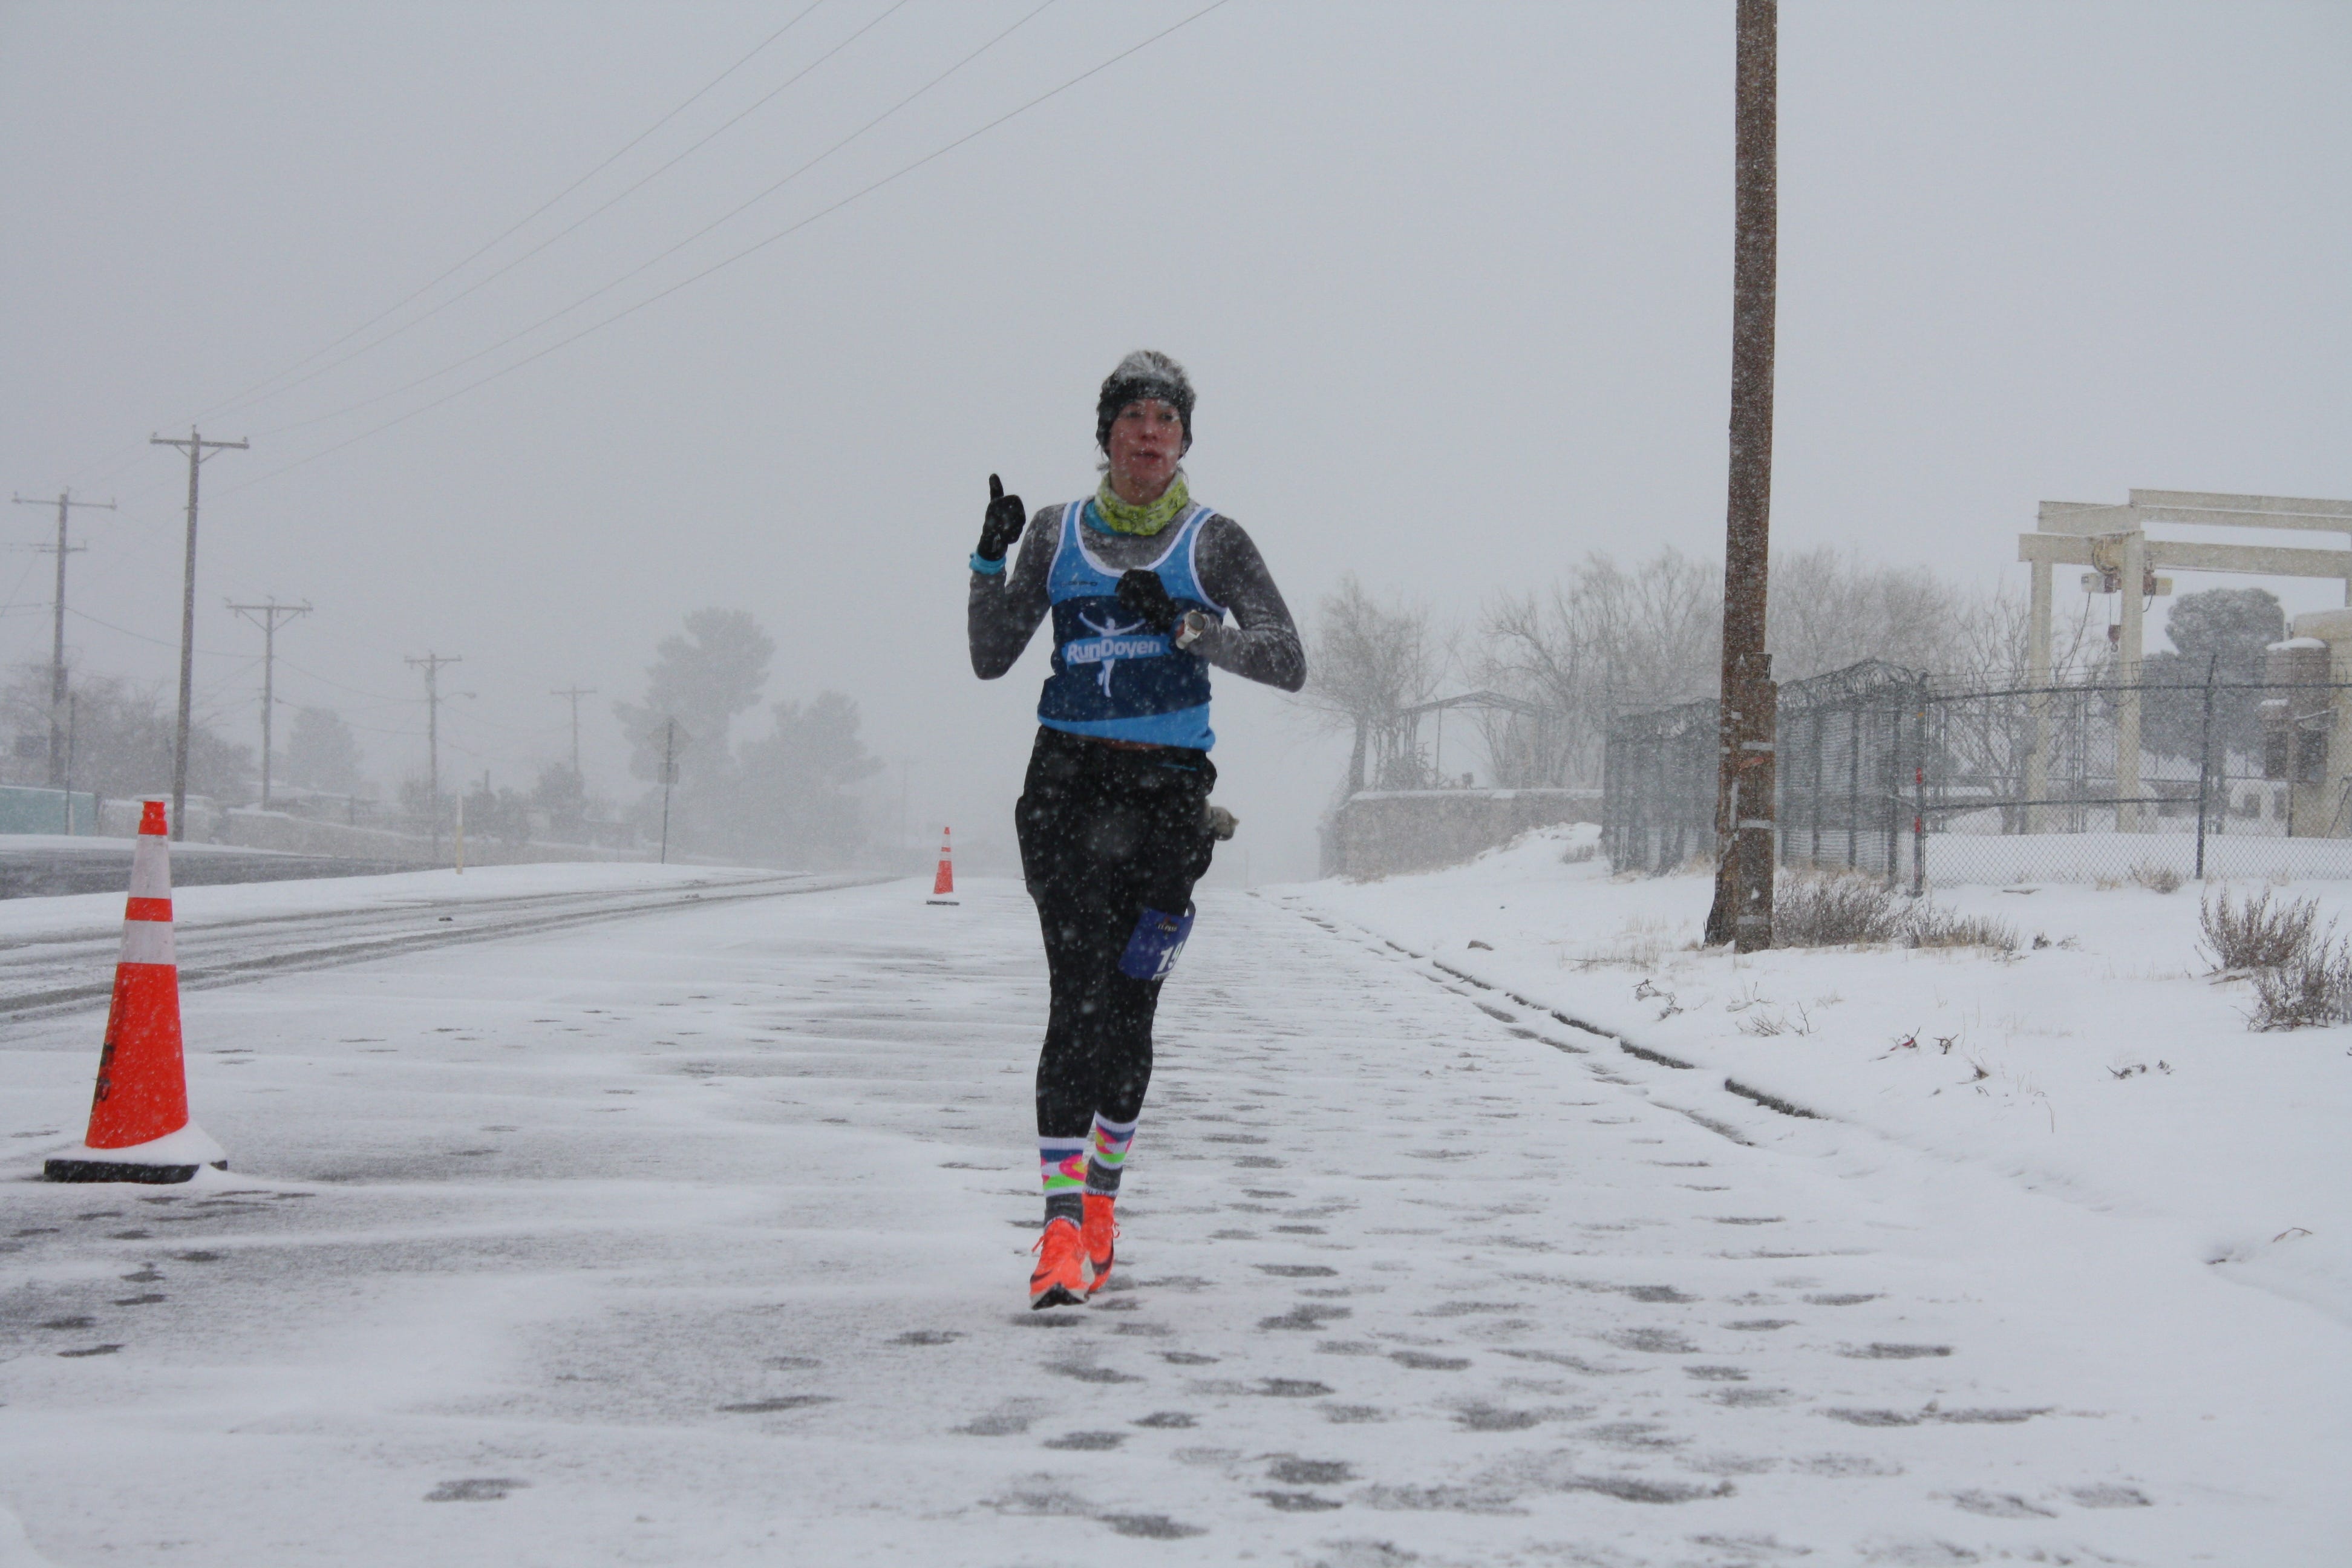 Runners ran in the snow at the Michelob Ultra El Paso Marathon on Sunday, Feb. 14, 2021. The race had a limited number of runners and virtual runners due to the COVID-19 safety measures.